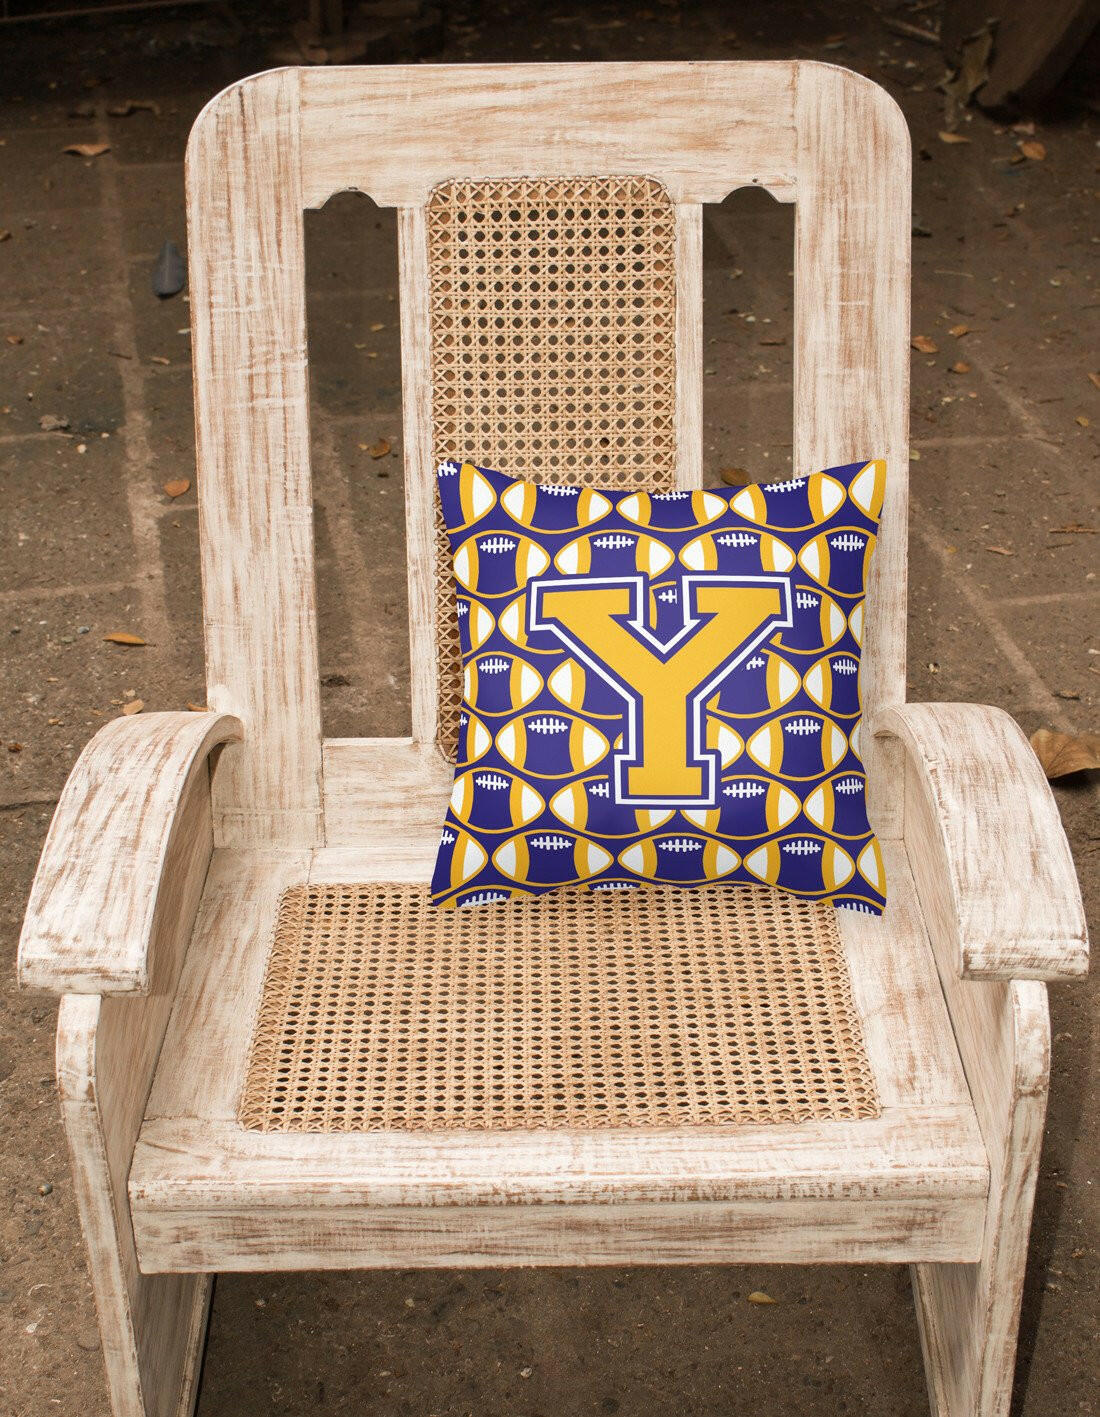 Letter Y Football Purple and Gold Fabric Decorative Pillow CJ1064-YPW1414 by Caroline's Treasures